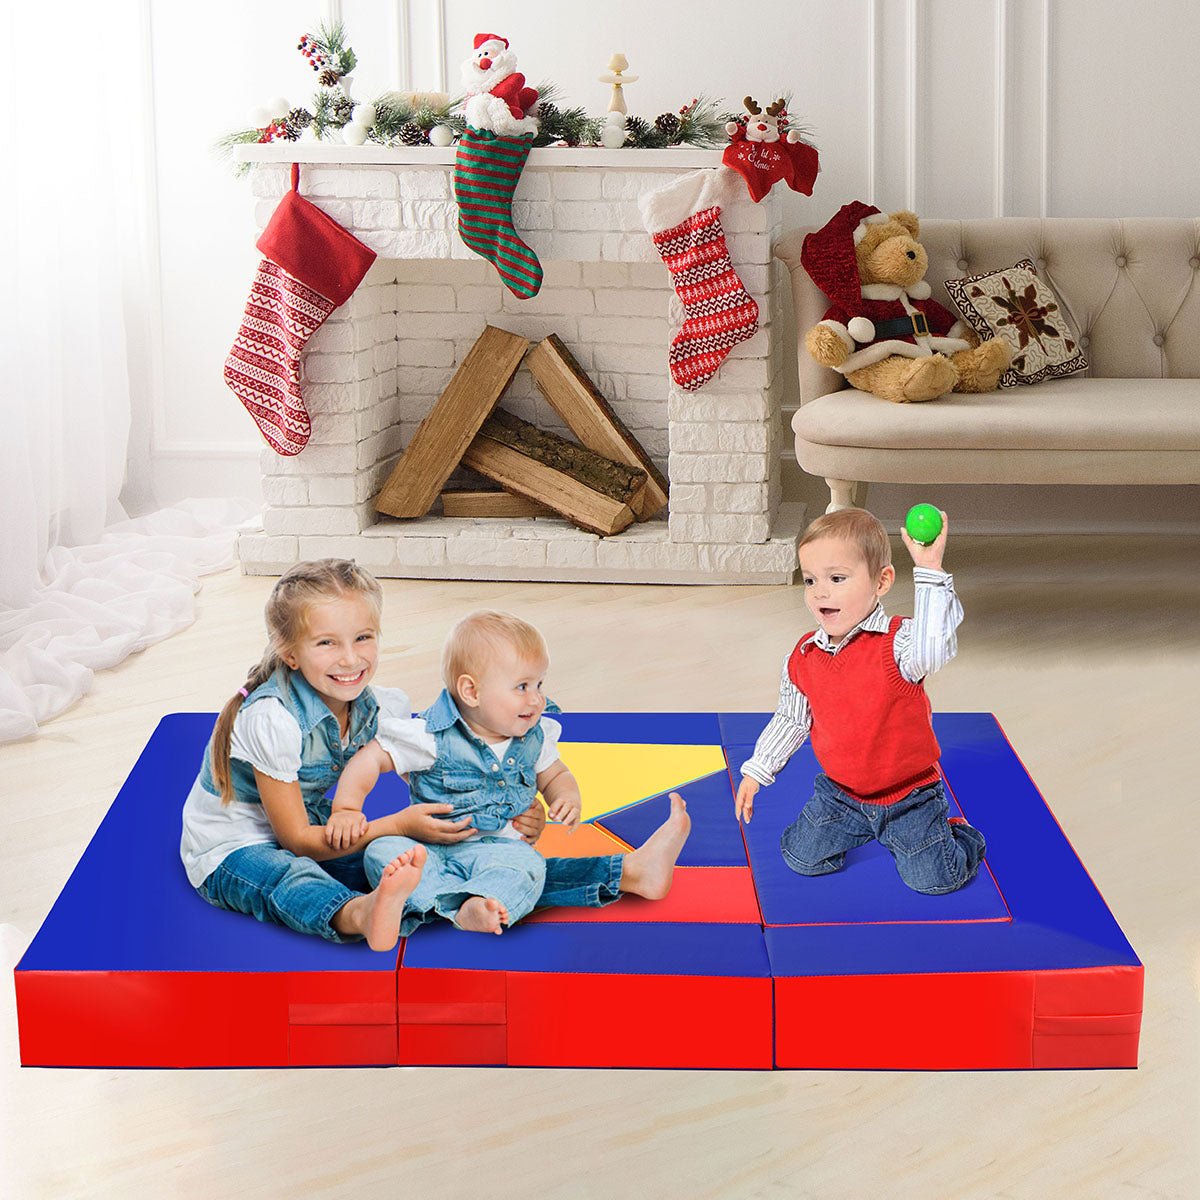 4-In-1 Children's Sofa Set - Multicolour Combo with Sturdy PU Surface